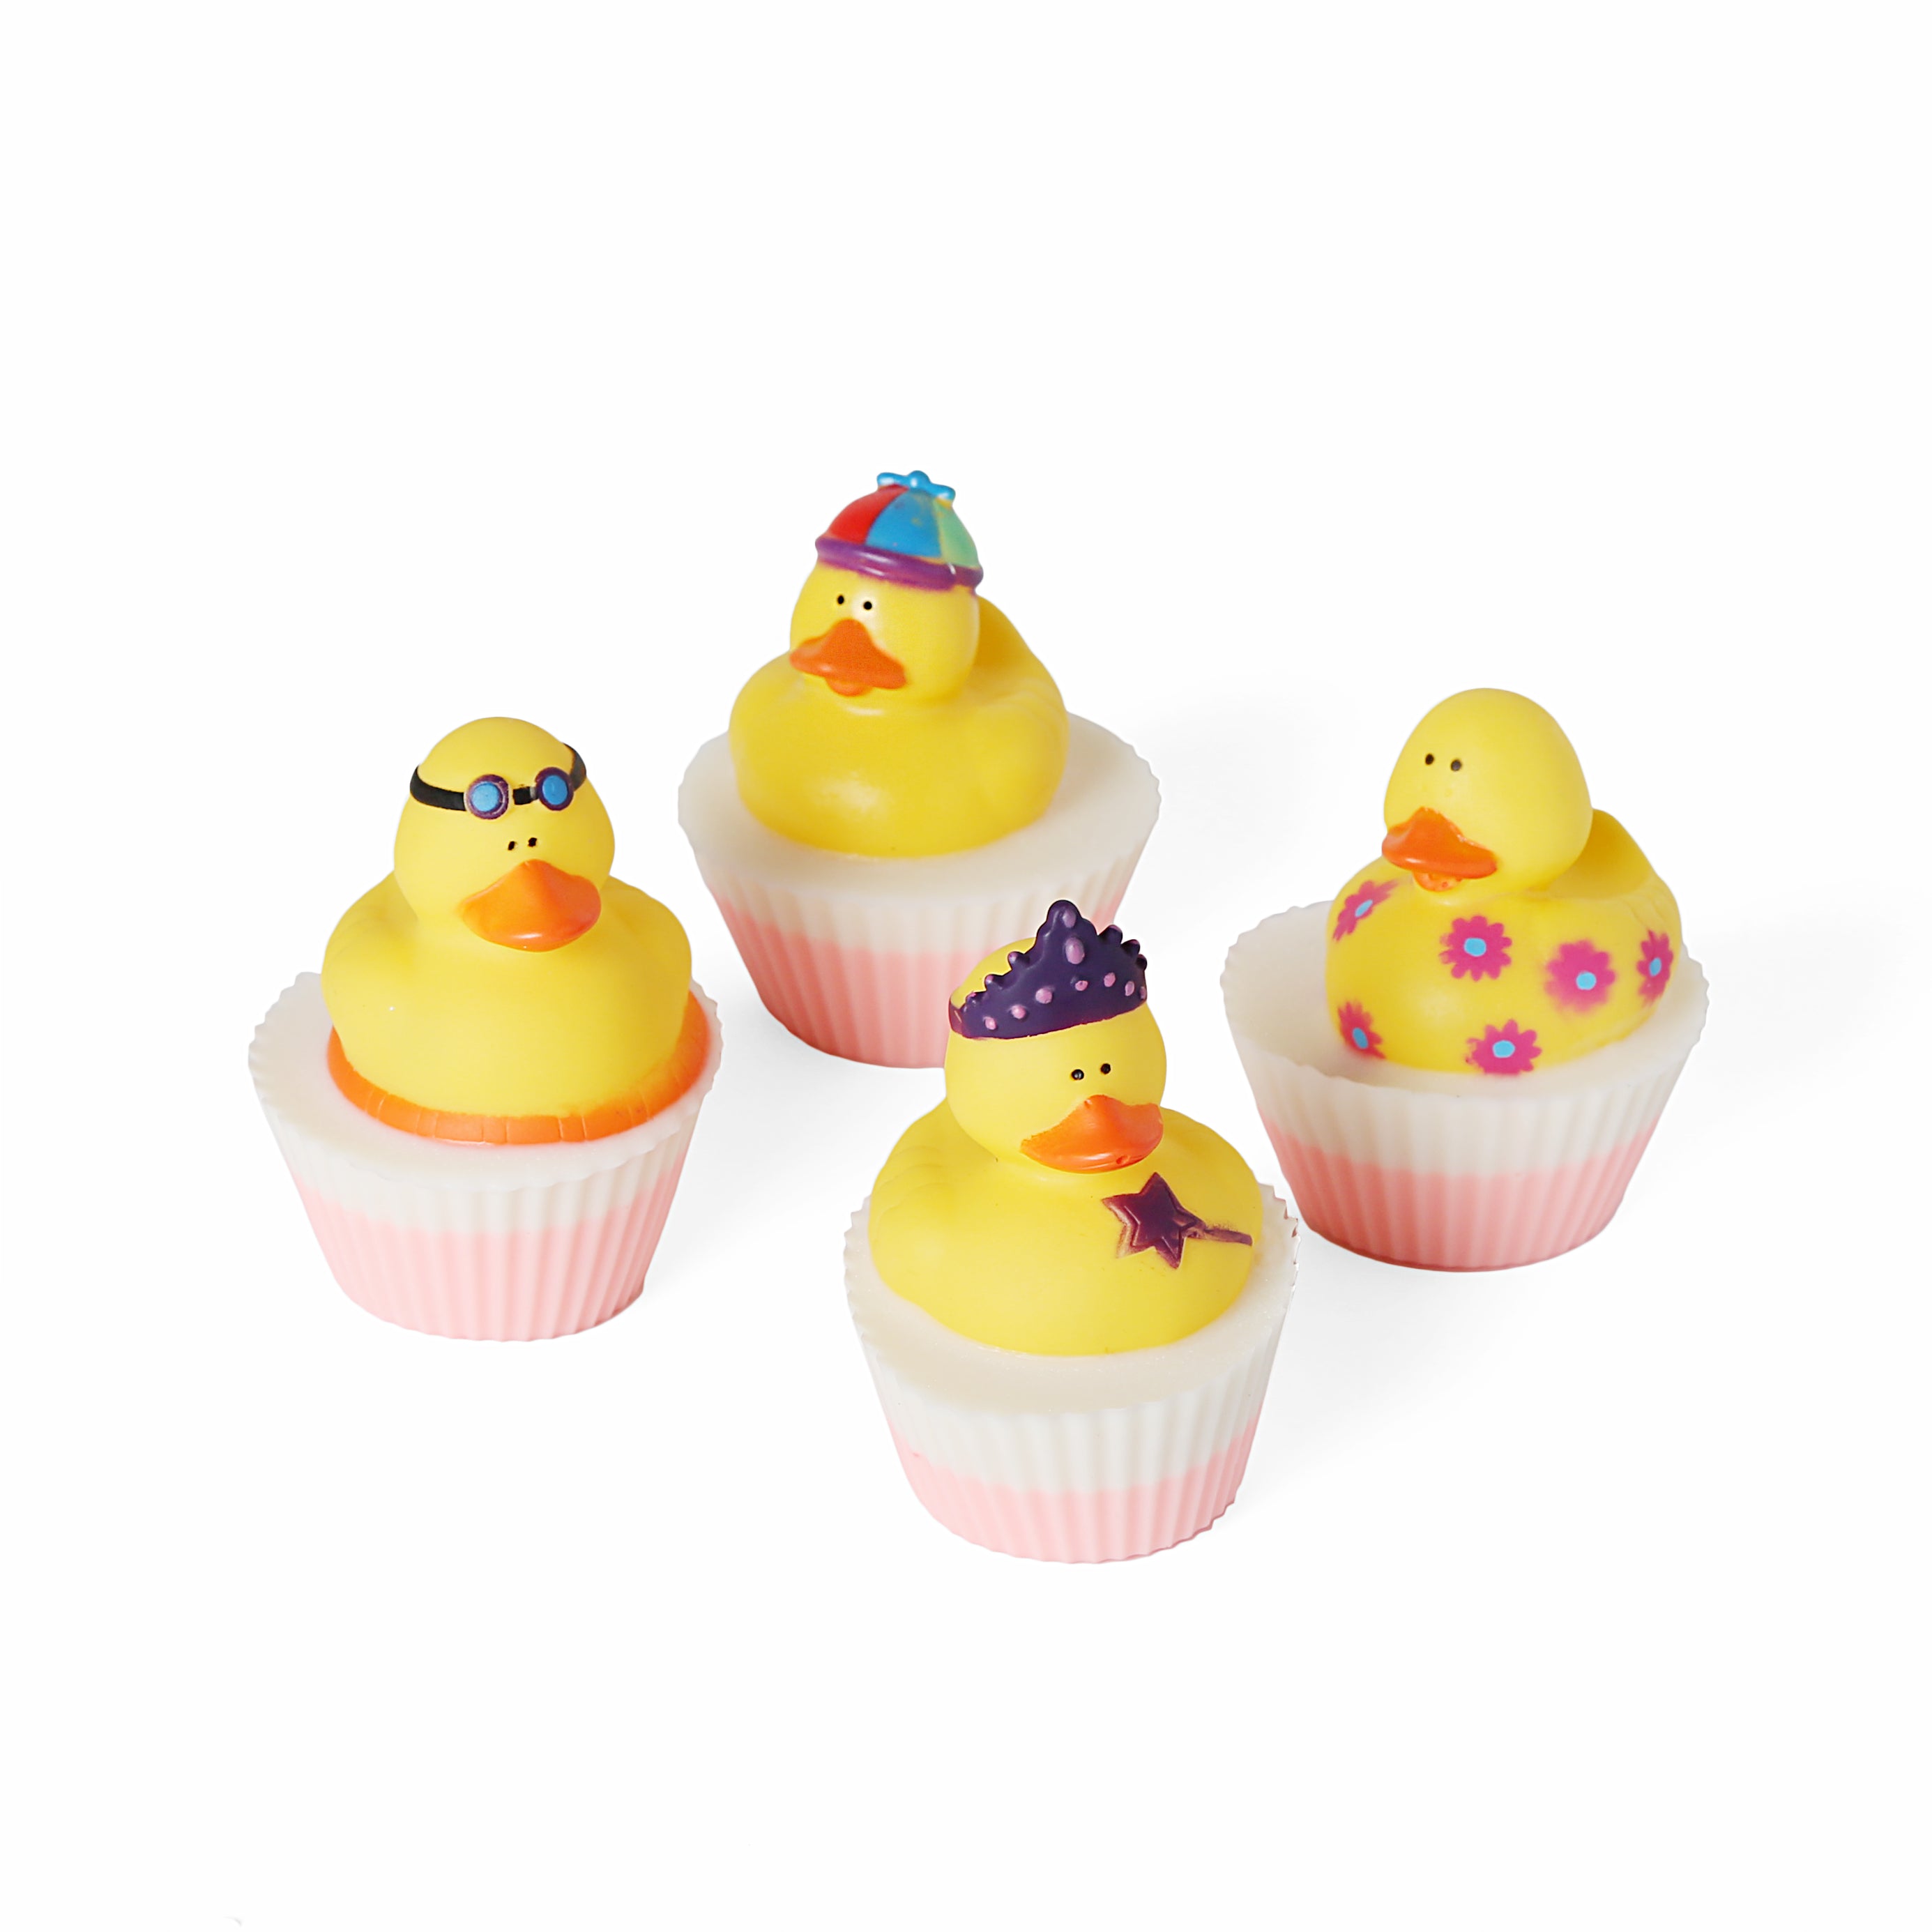 Collection of four rubber Duckie soaps. Round shaped with light pink and white liners. Topped with different variations of yellow ducks. One has a crown and magic wand, one has flowers, one has goggles, and one has colorful hat.